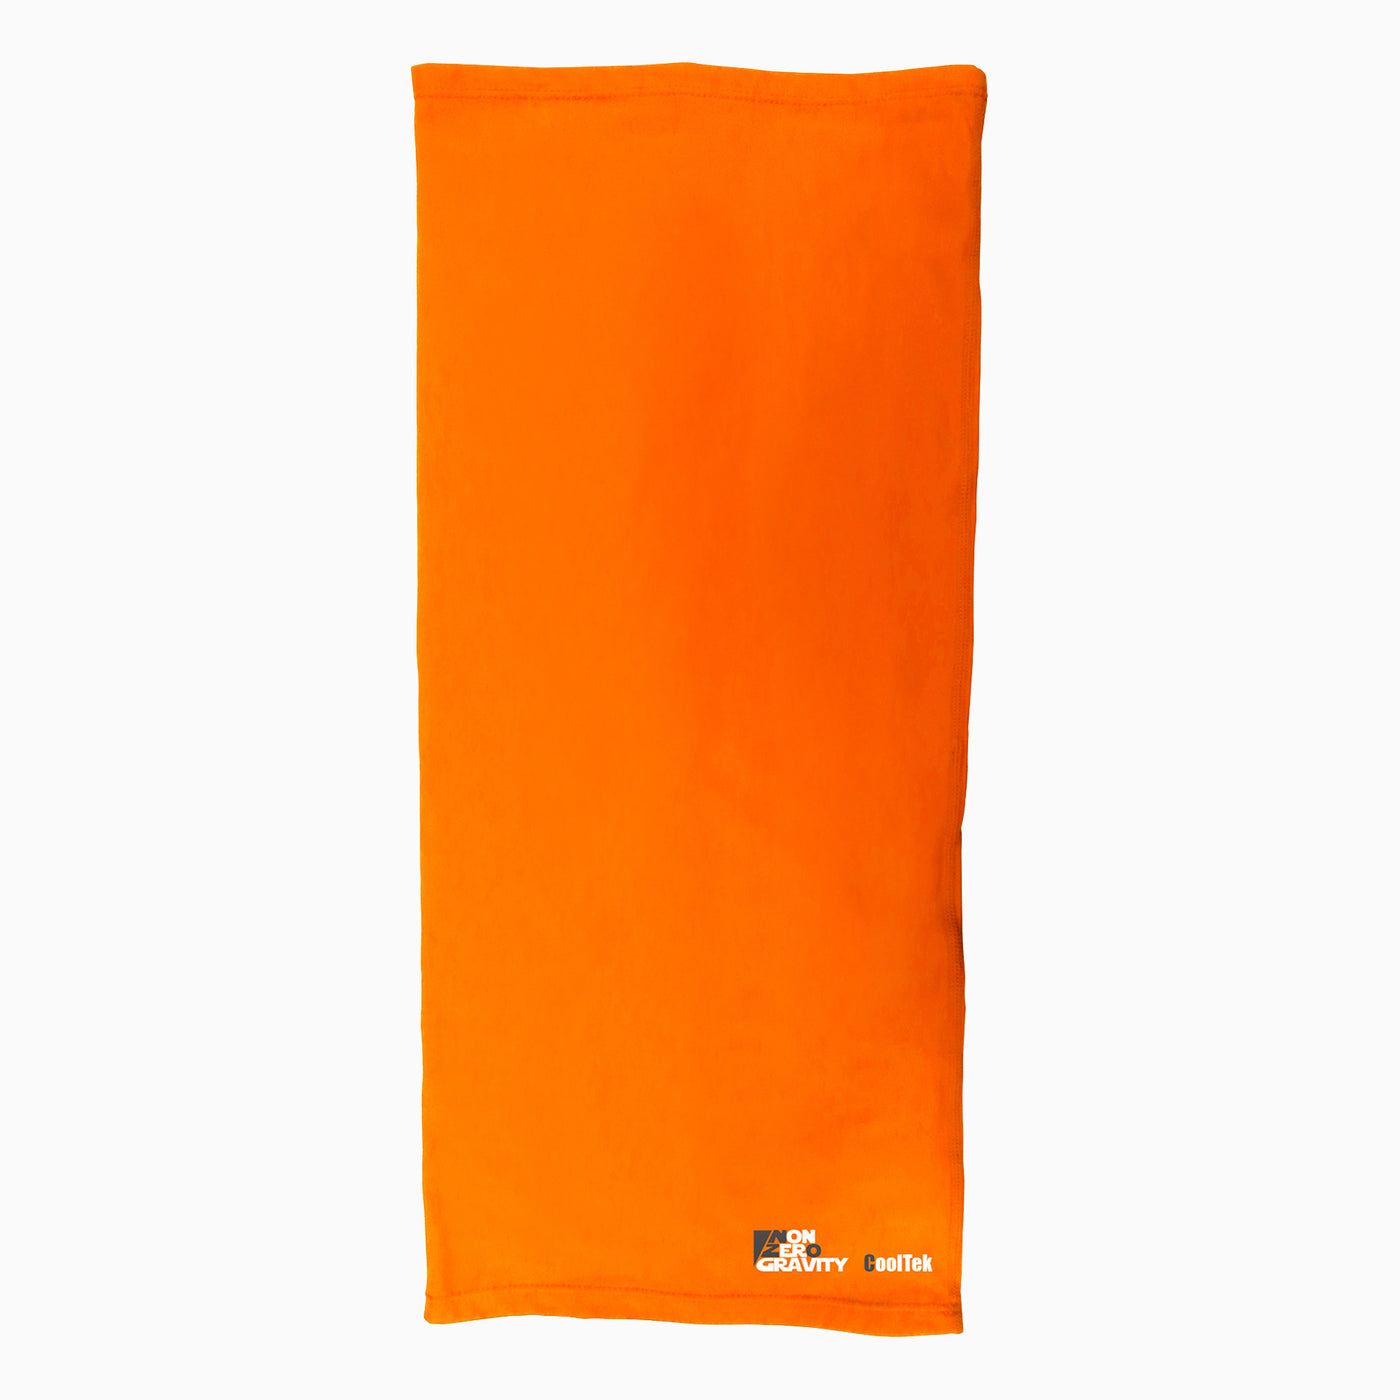 an orange spandex neck gaiter to mask and protect your face